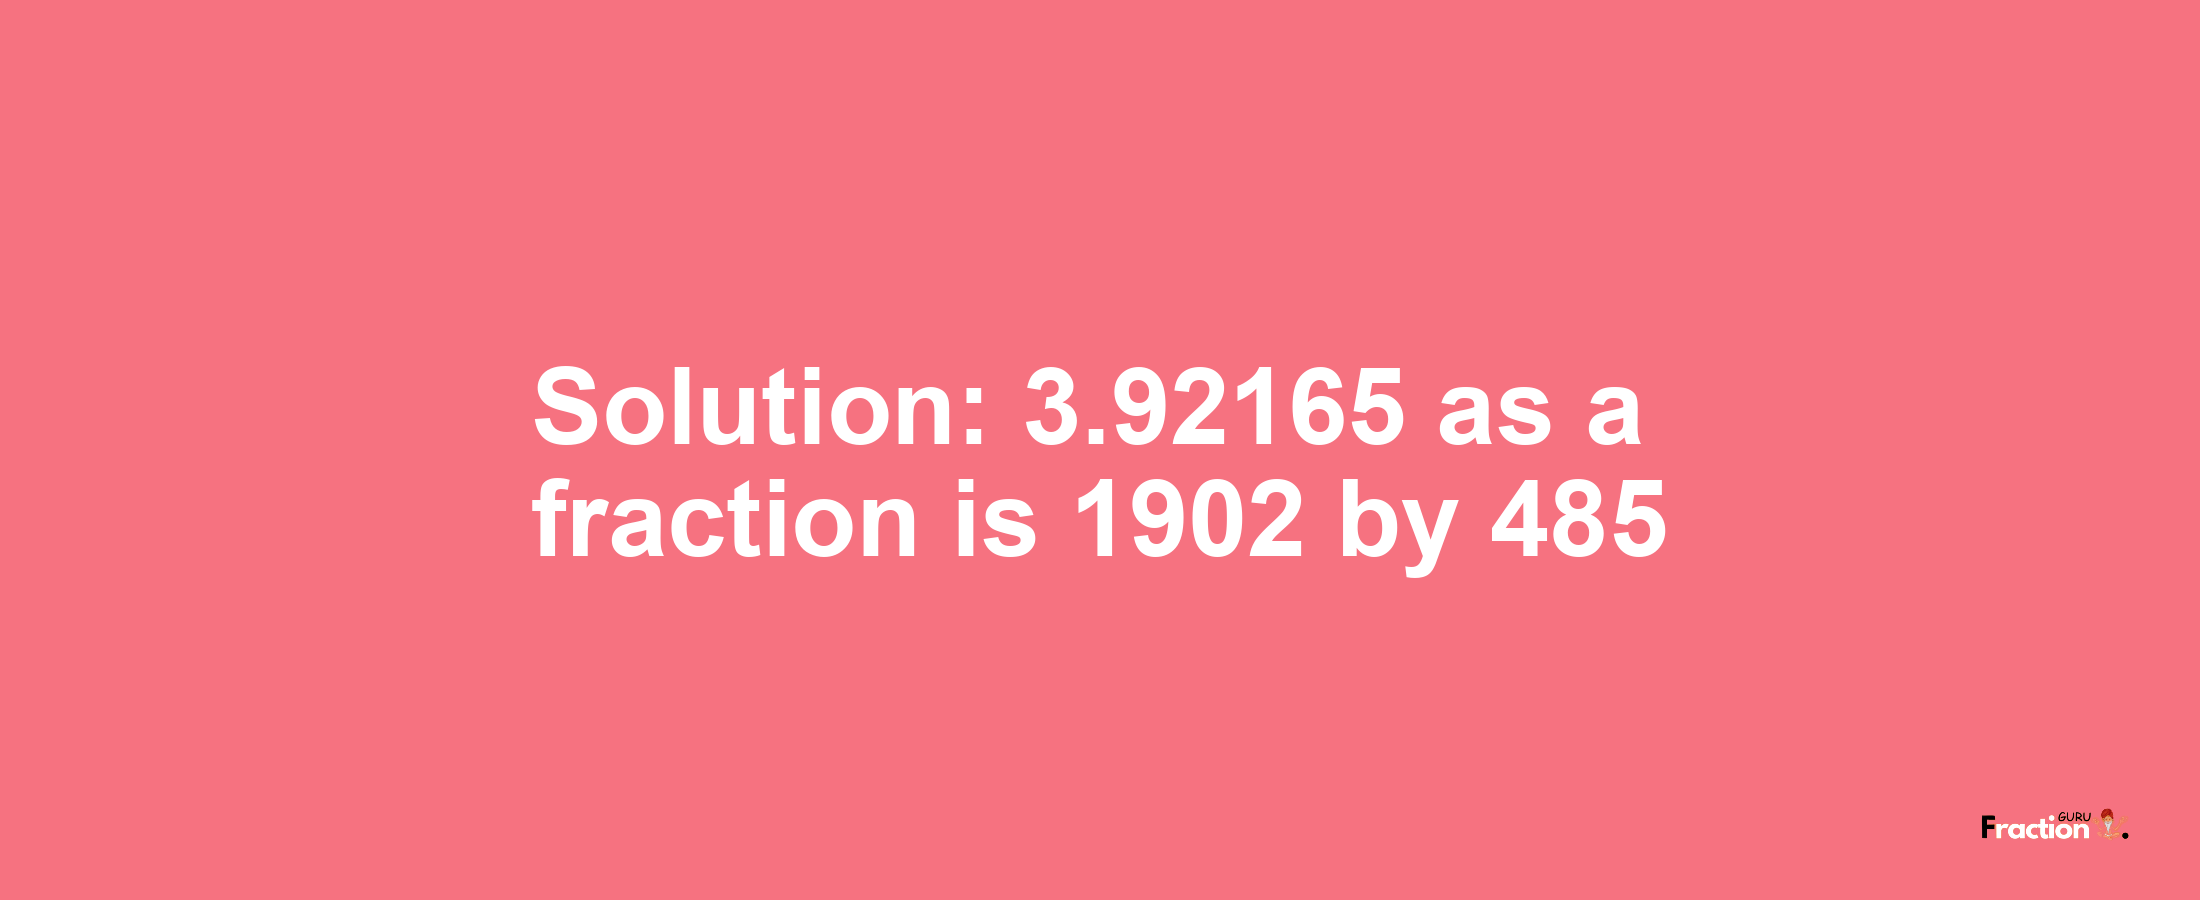 Solution:3.92165 as a fraction is 1902/485